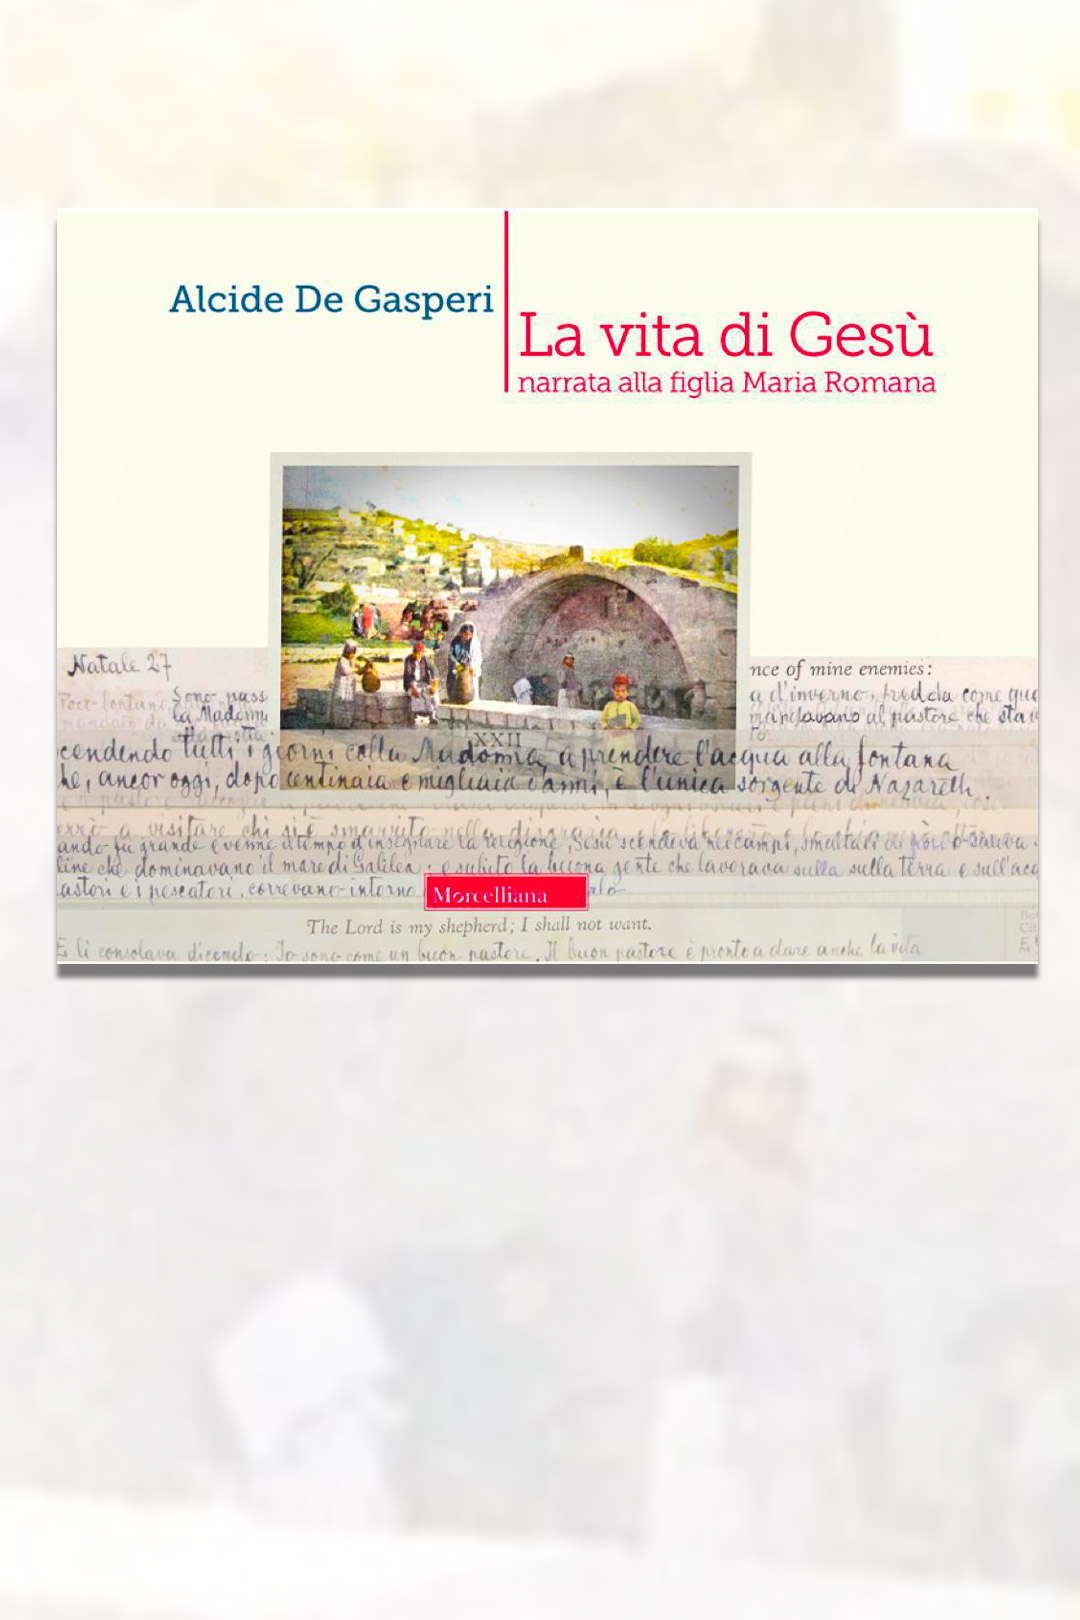 A touching story in the life of Alcide De Gasperi